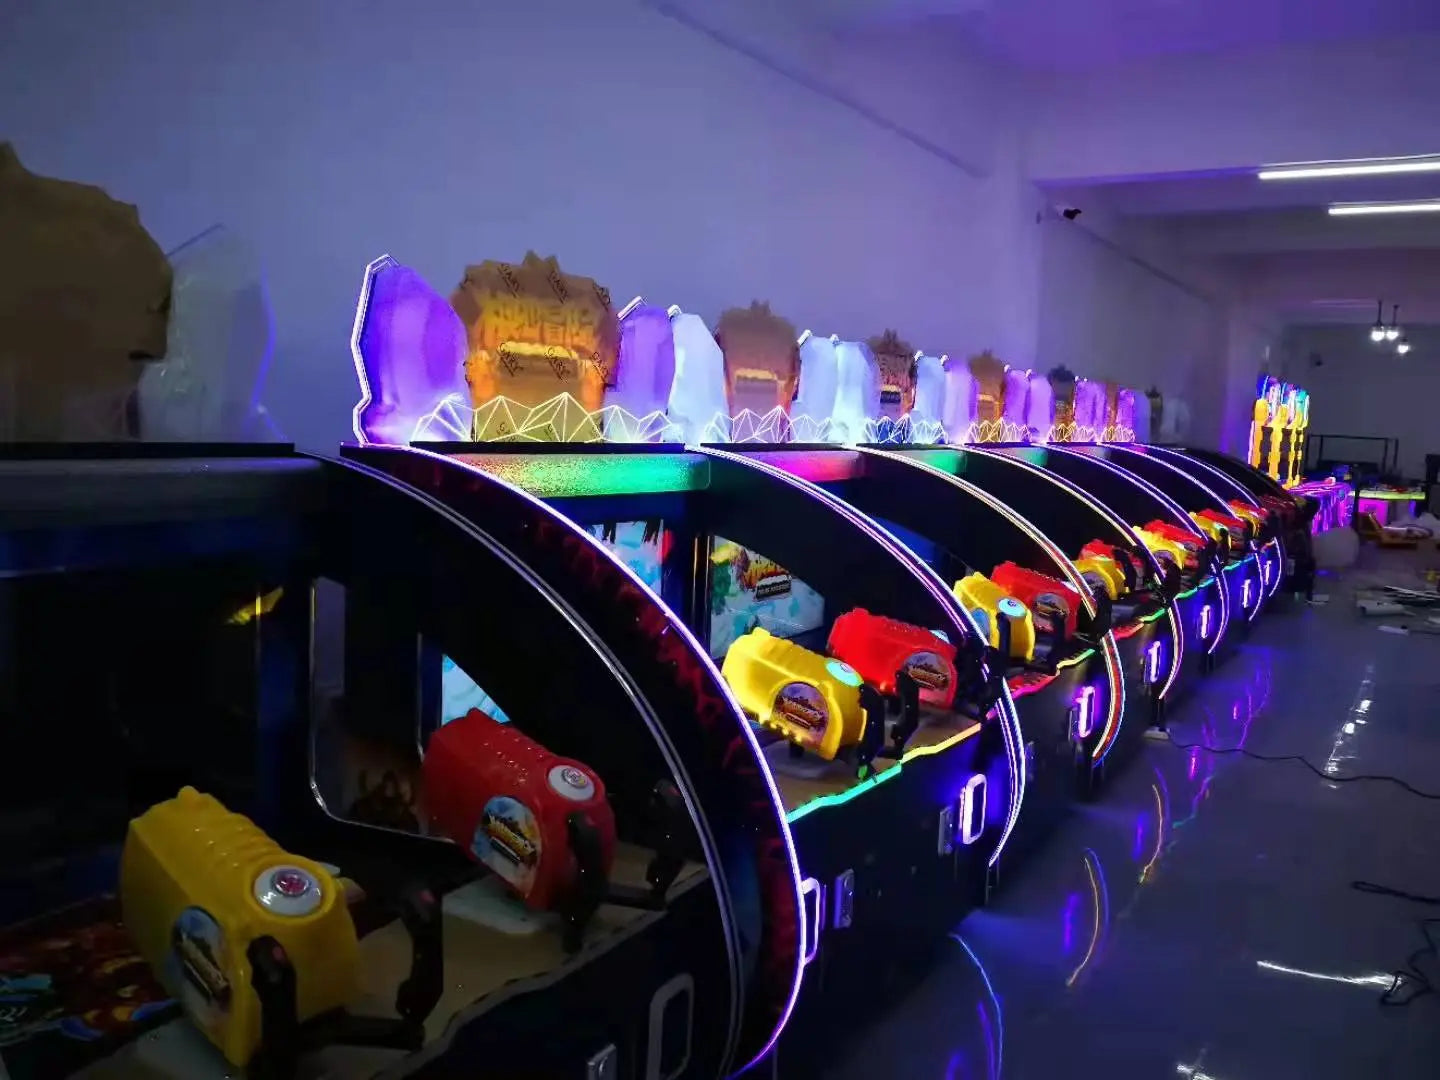 Polar-Adventure-Laser-shooting-game-machine-Newest-Indoor-Amusement-Coin-Operated-Lottery-Ticket-Redemption-games-for-kids-tomy-arcade